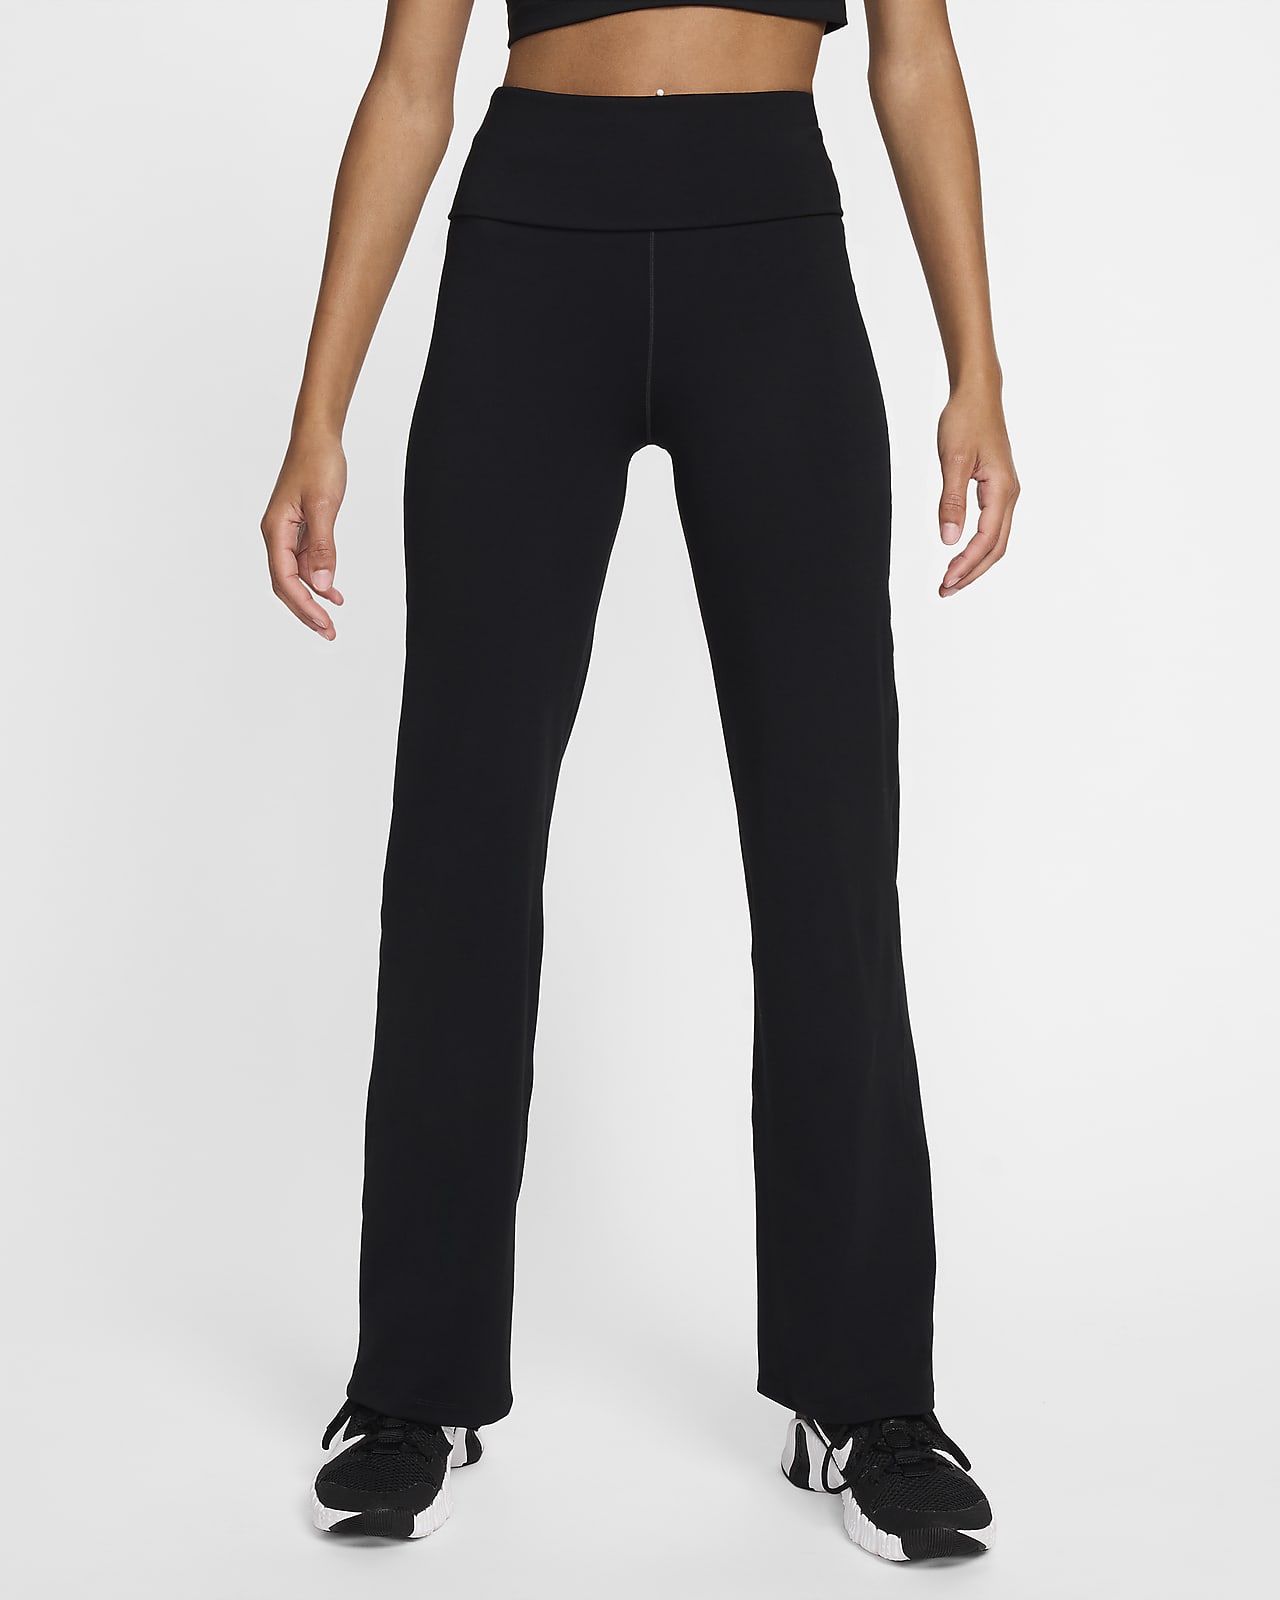 Nike One Women's Dri-FIT High-Waisted Fold-Over Trousers